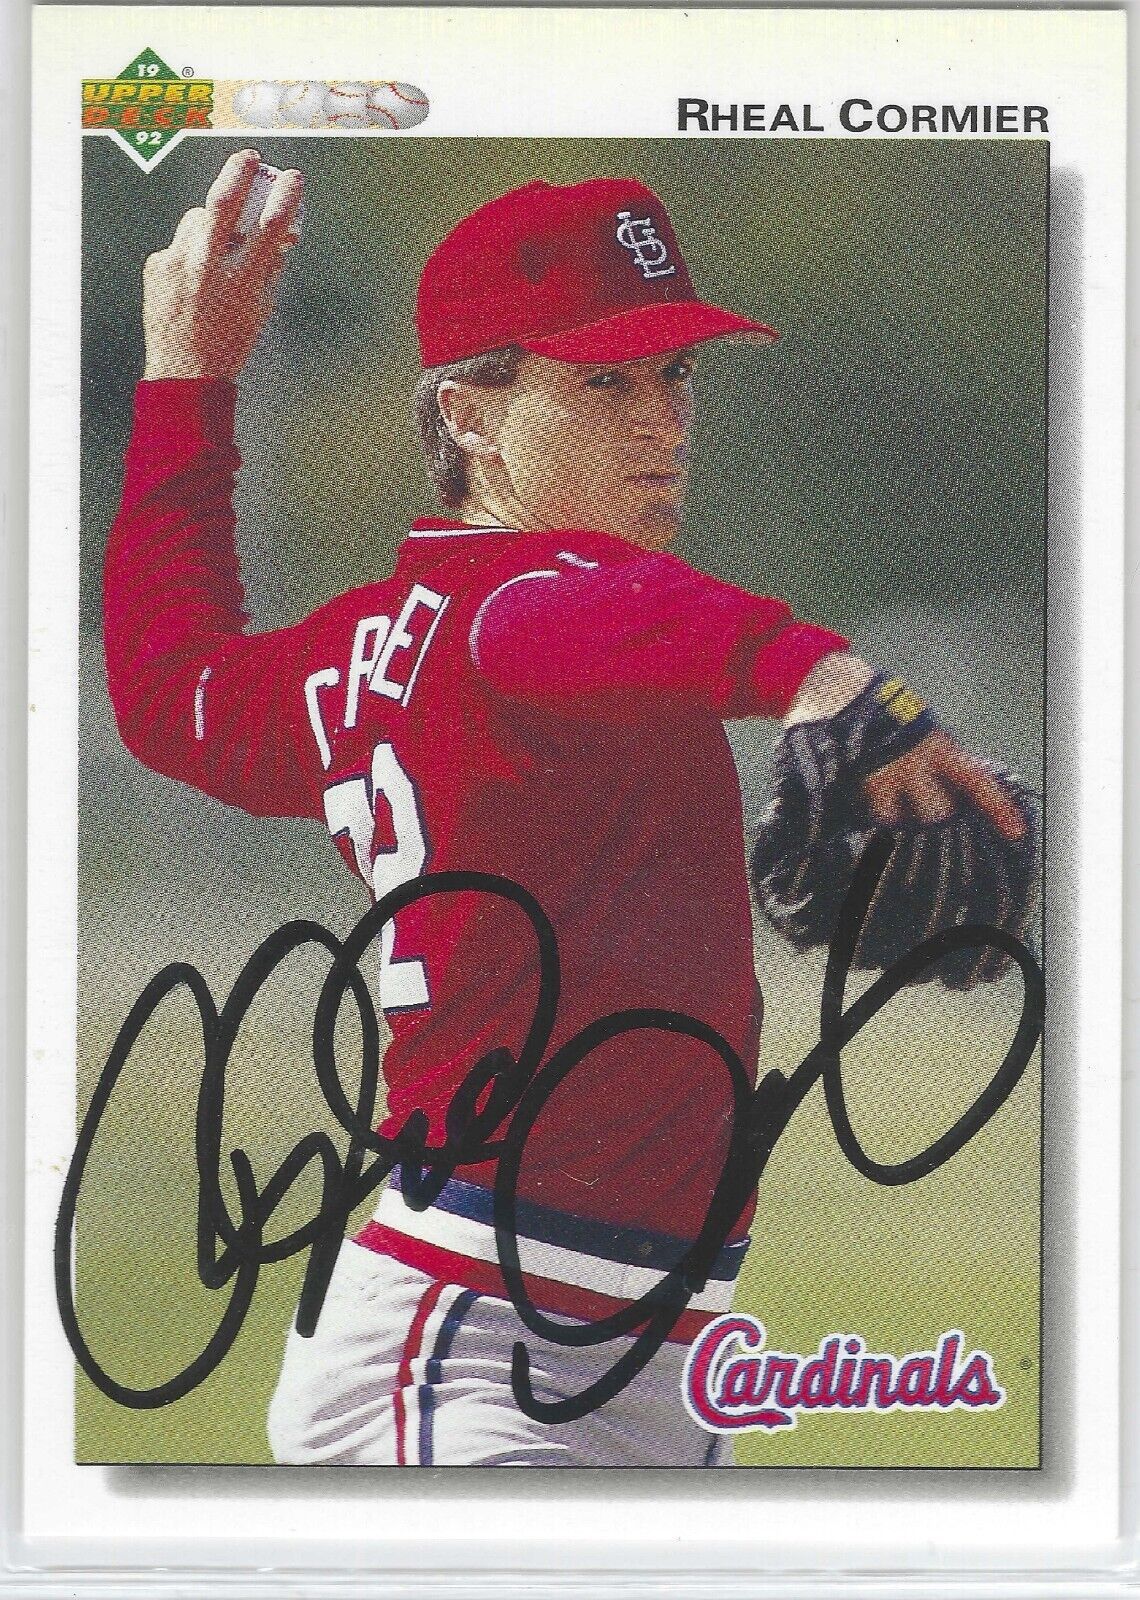 Primary image for Rheal Cormier Auto - Signed Autograph 1992 Upper Deck #574 - St. Louis Cardinals